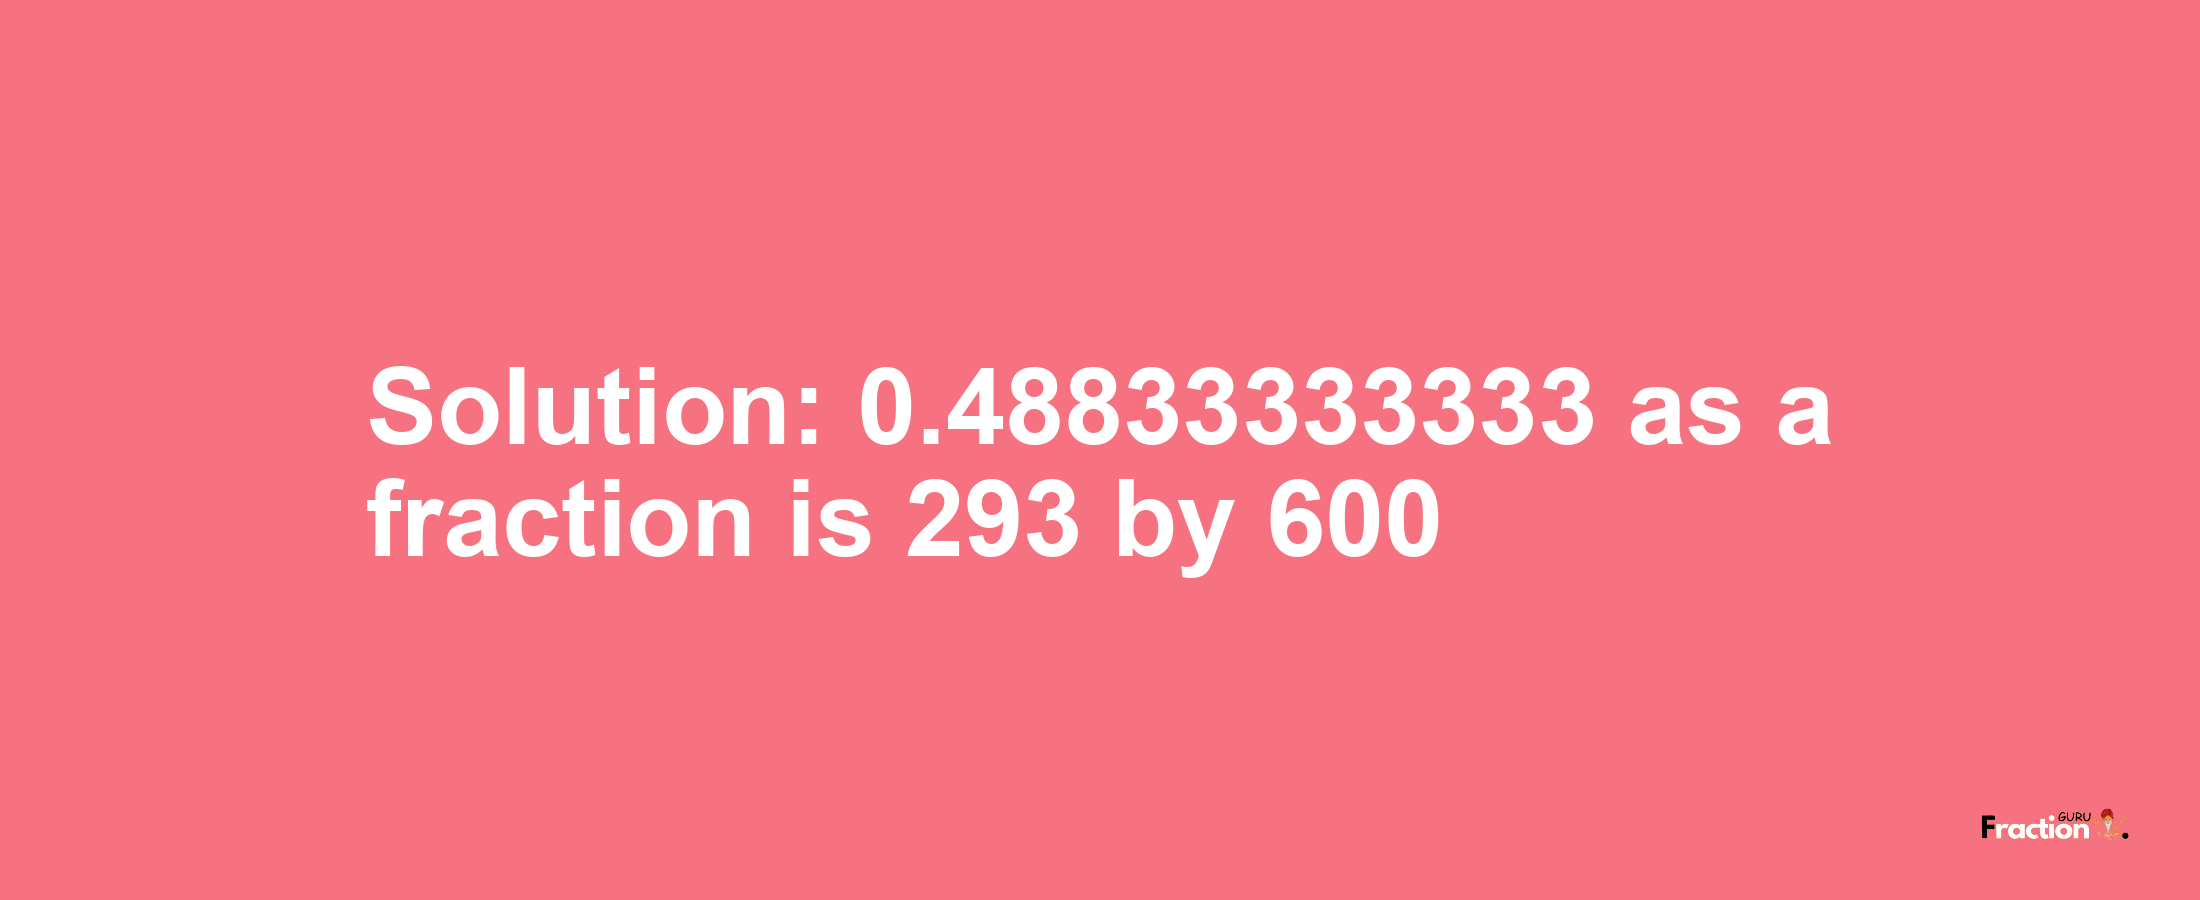 Solution:0.48833333333 as a fraction is 293/600